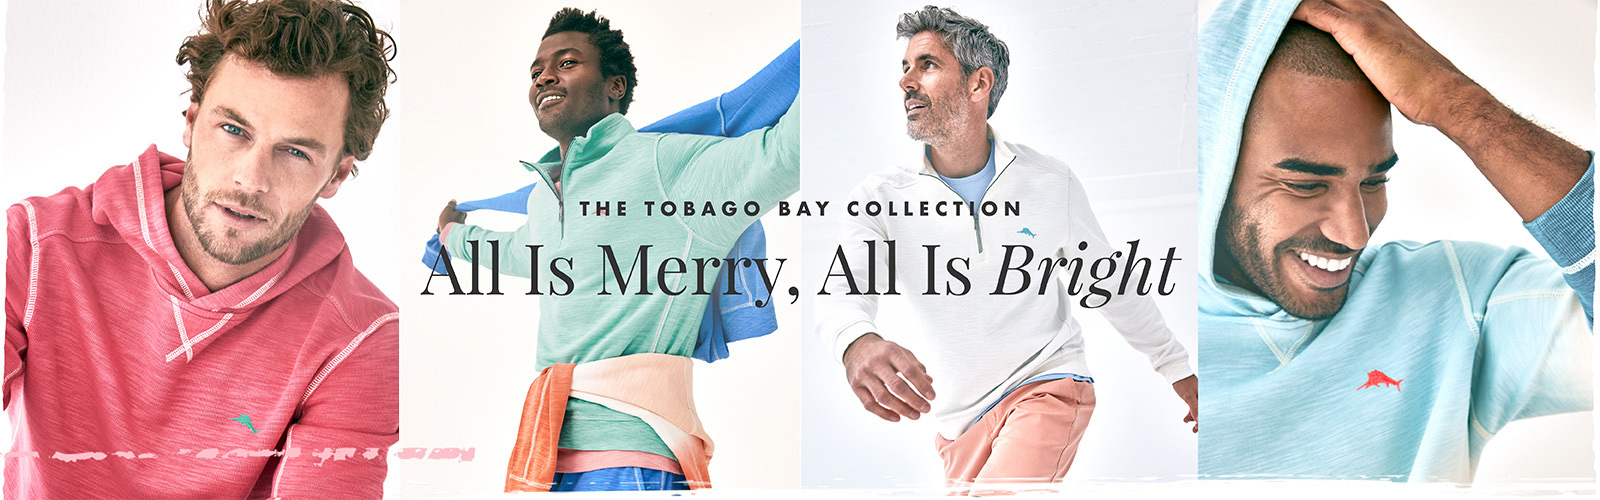 The Tobago Bay Collection - All Is Merry, All Is Bright